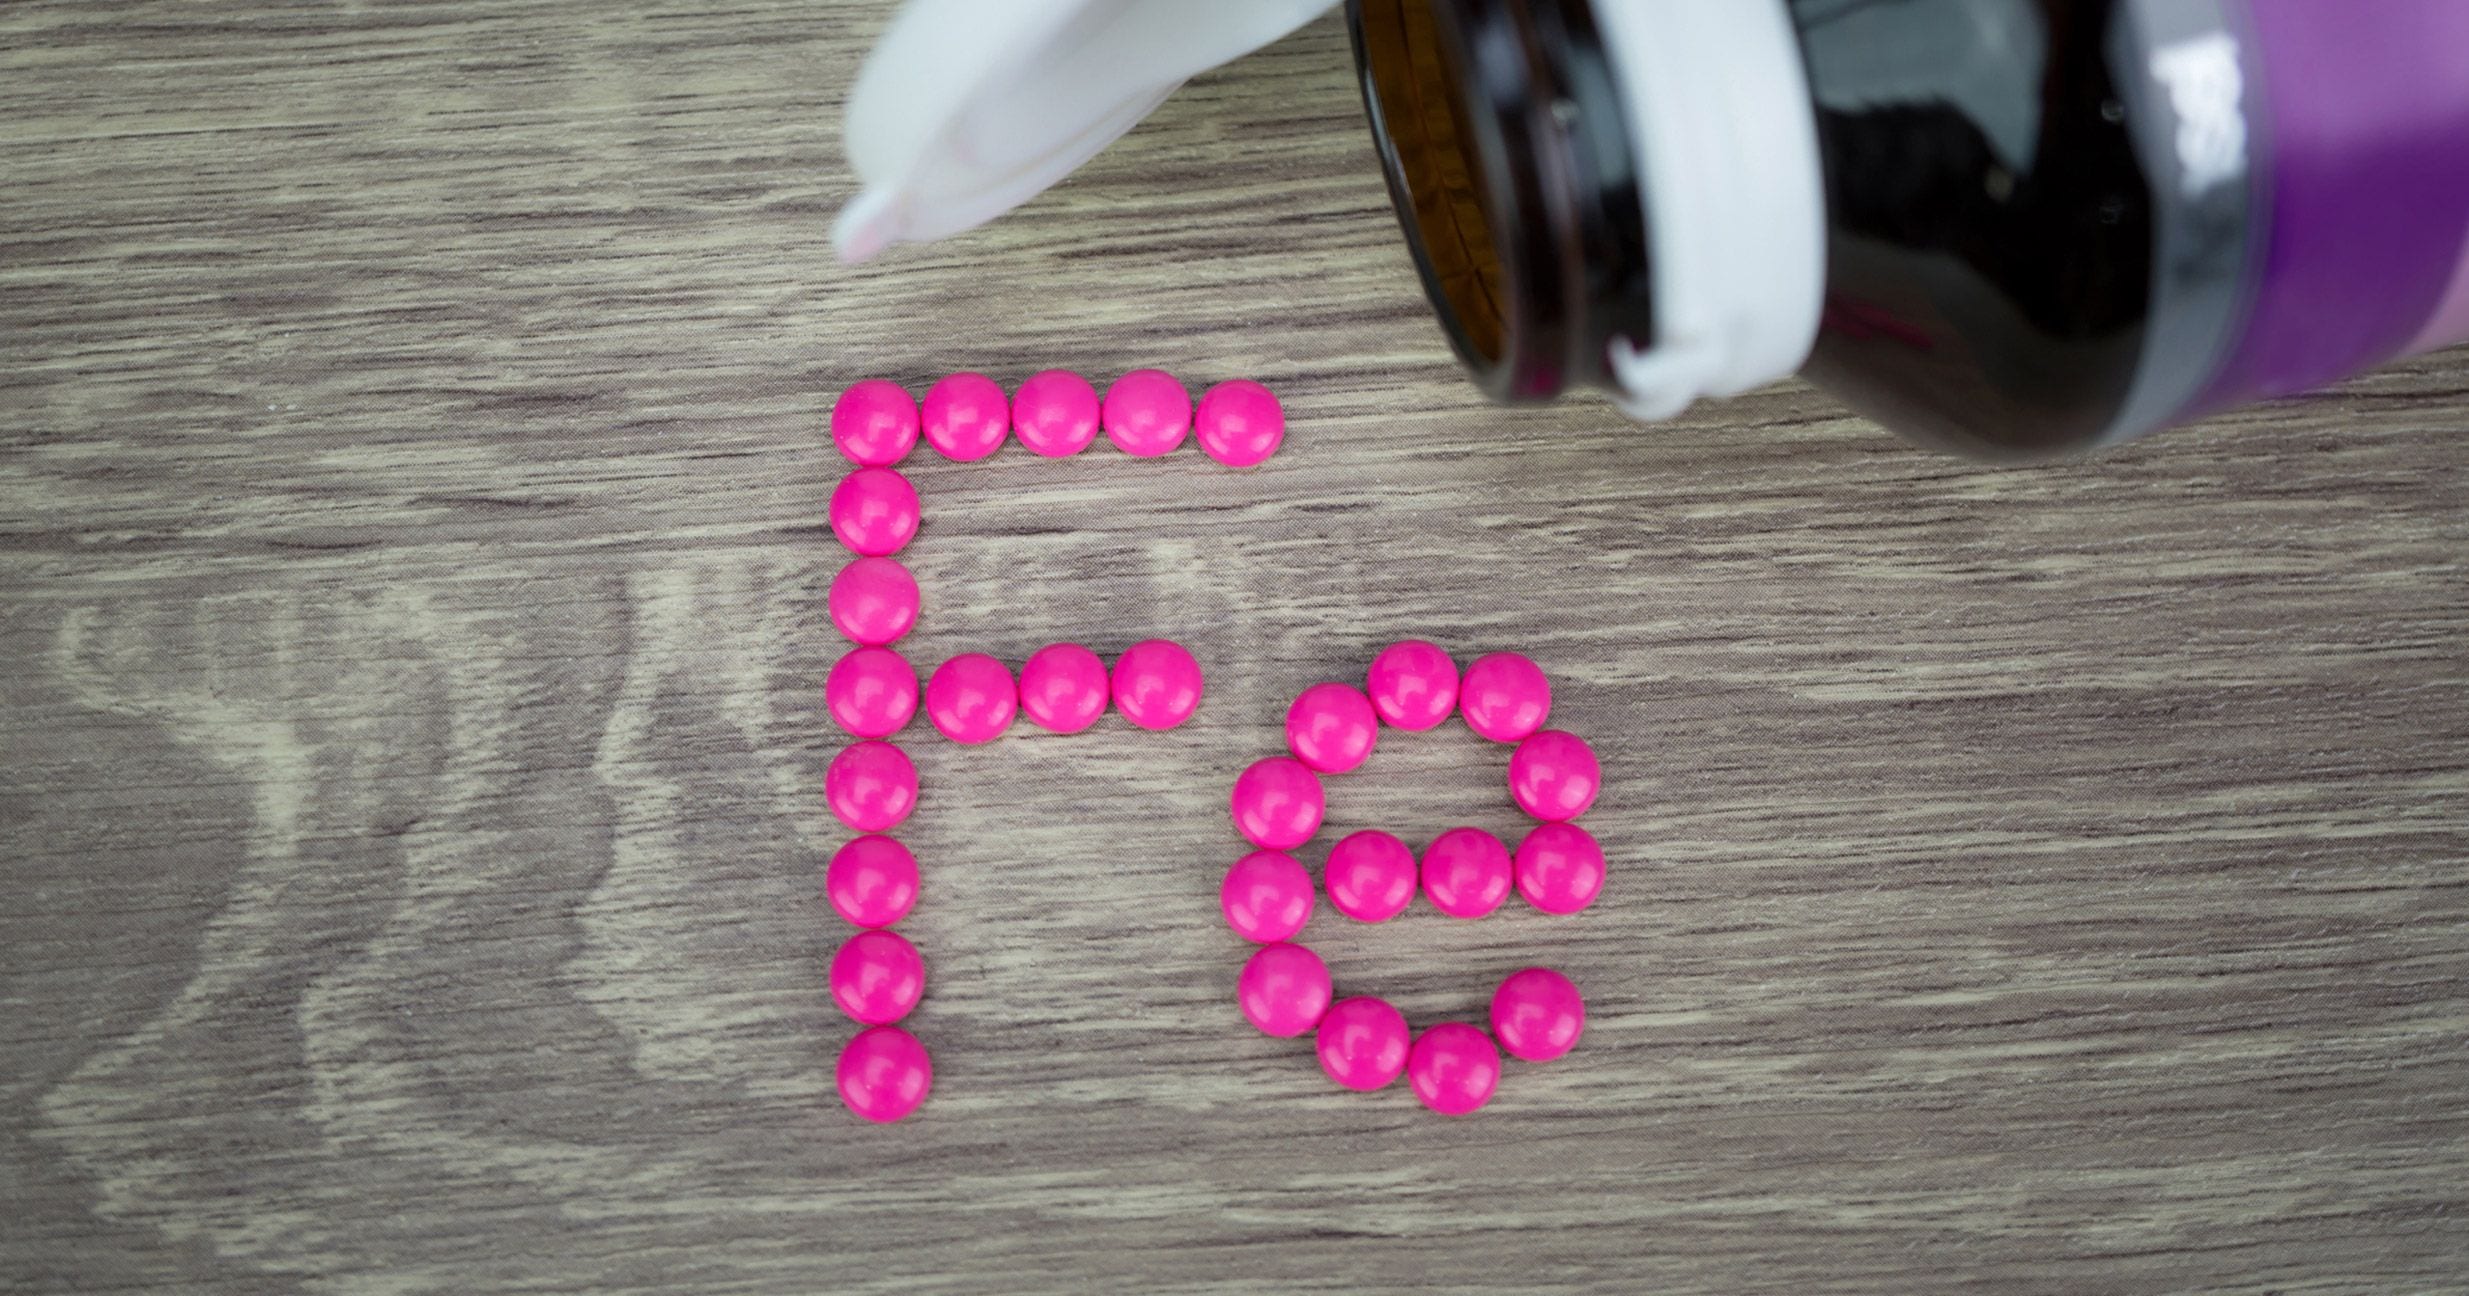 iron supplement tablets arranged to show elemental symbol of iron